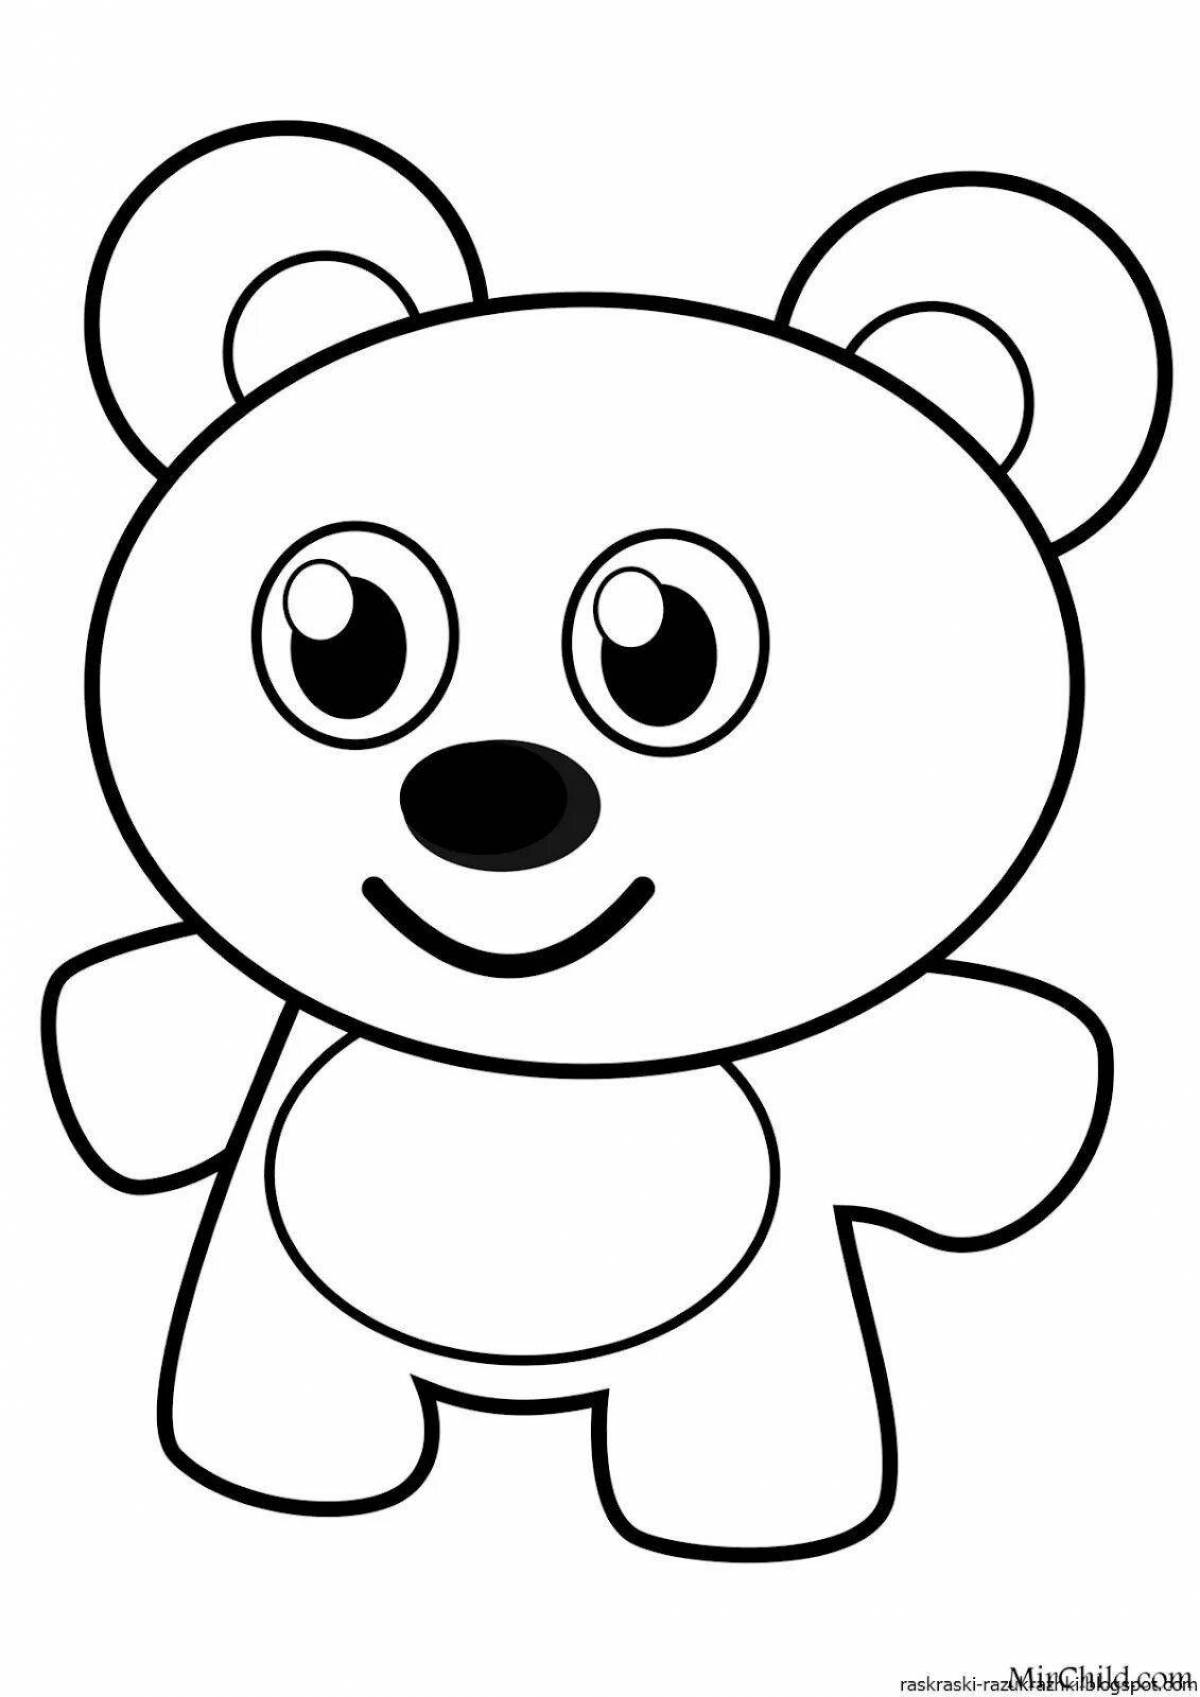 Colorful coloring book for babies